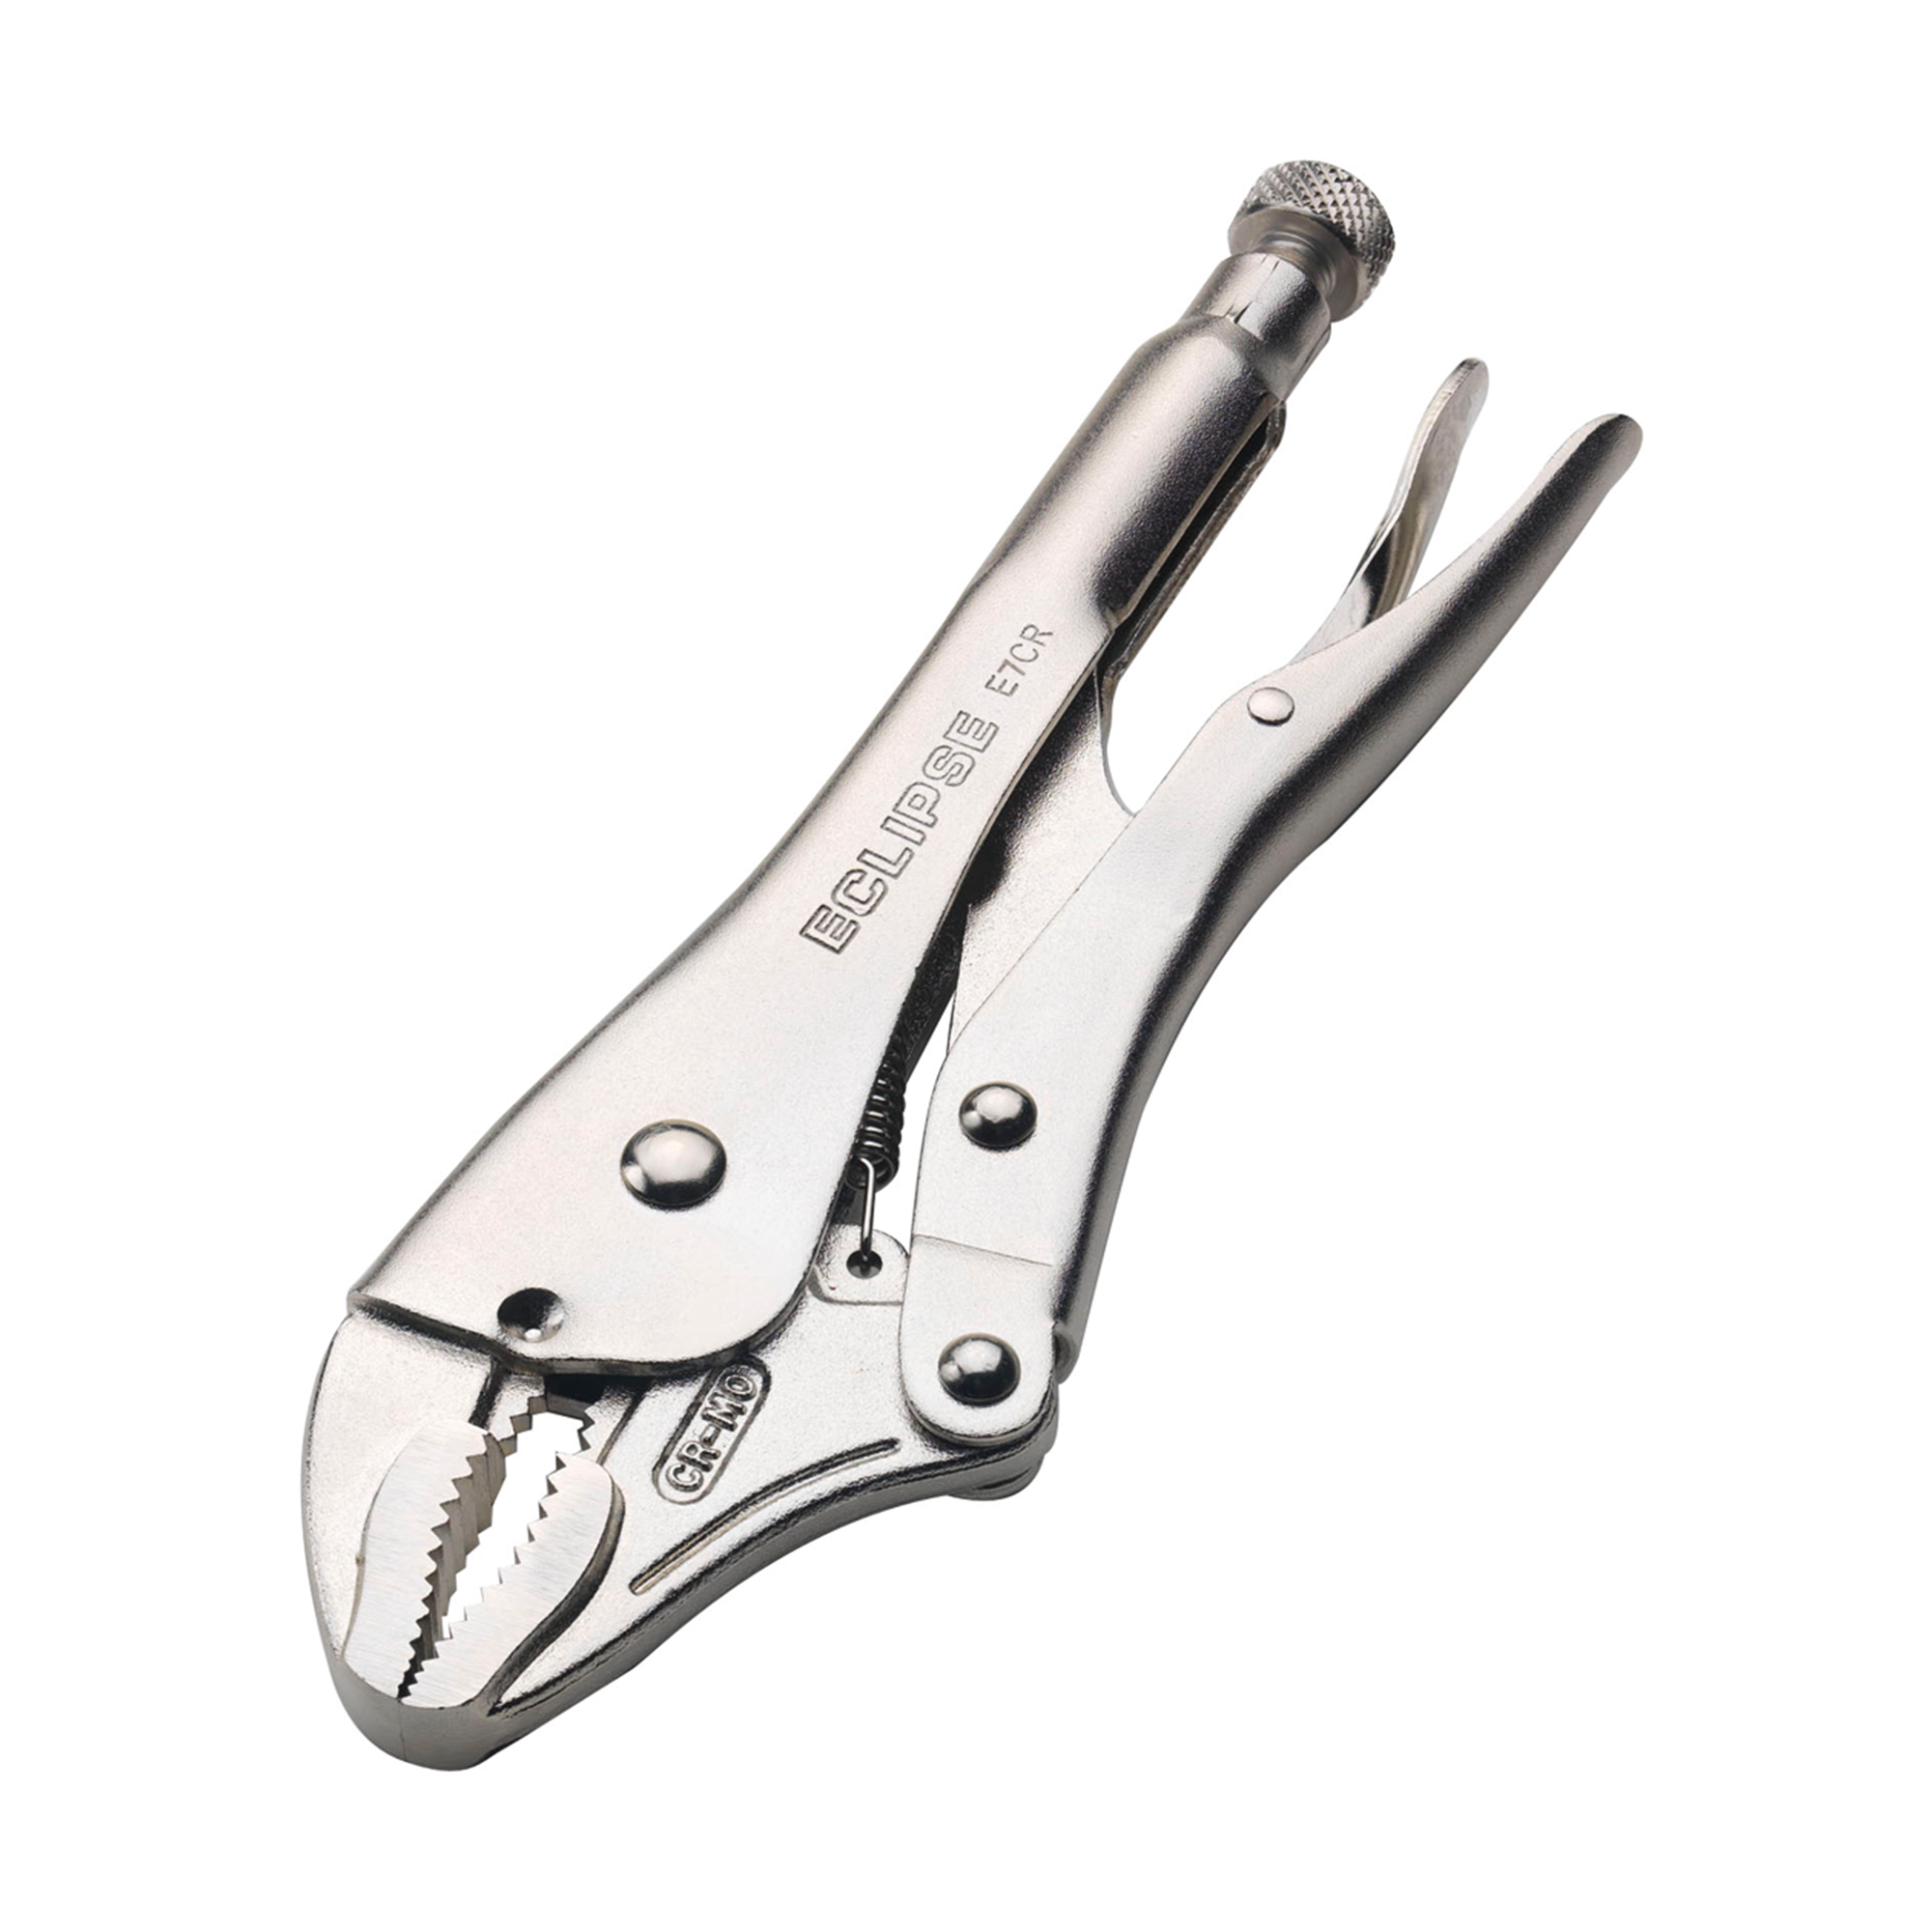 Locking Plier Curved Jaw by Eclipse